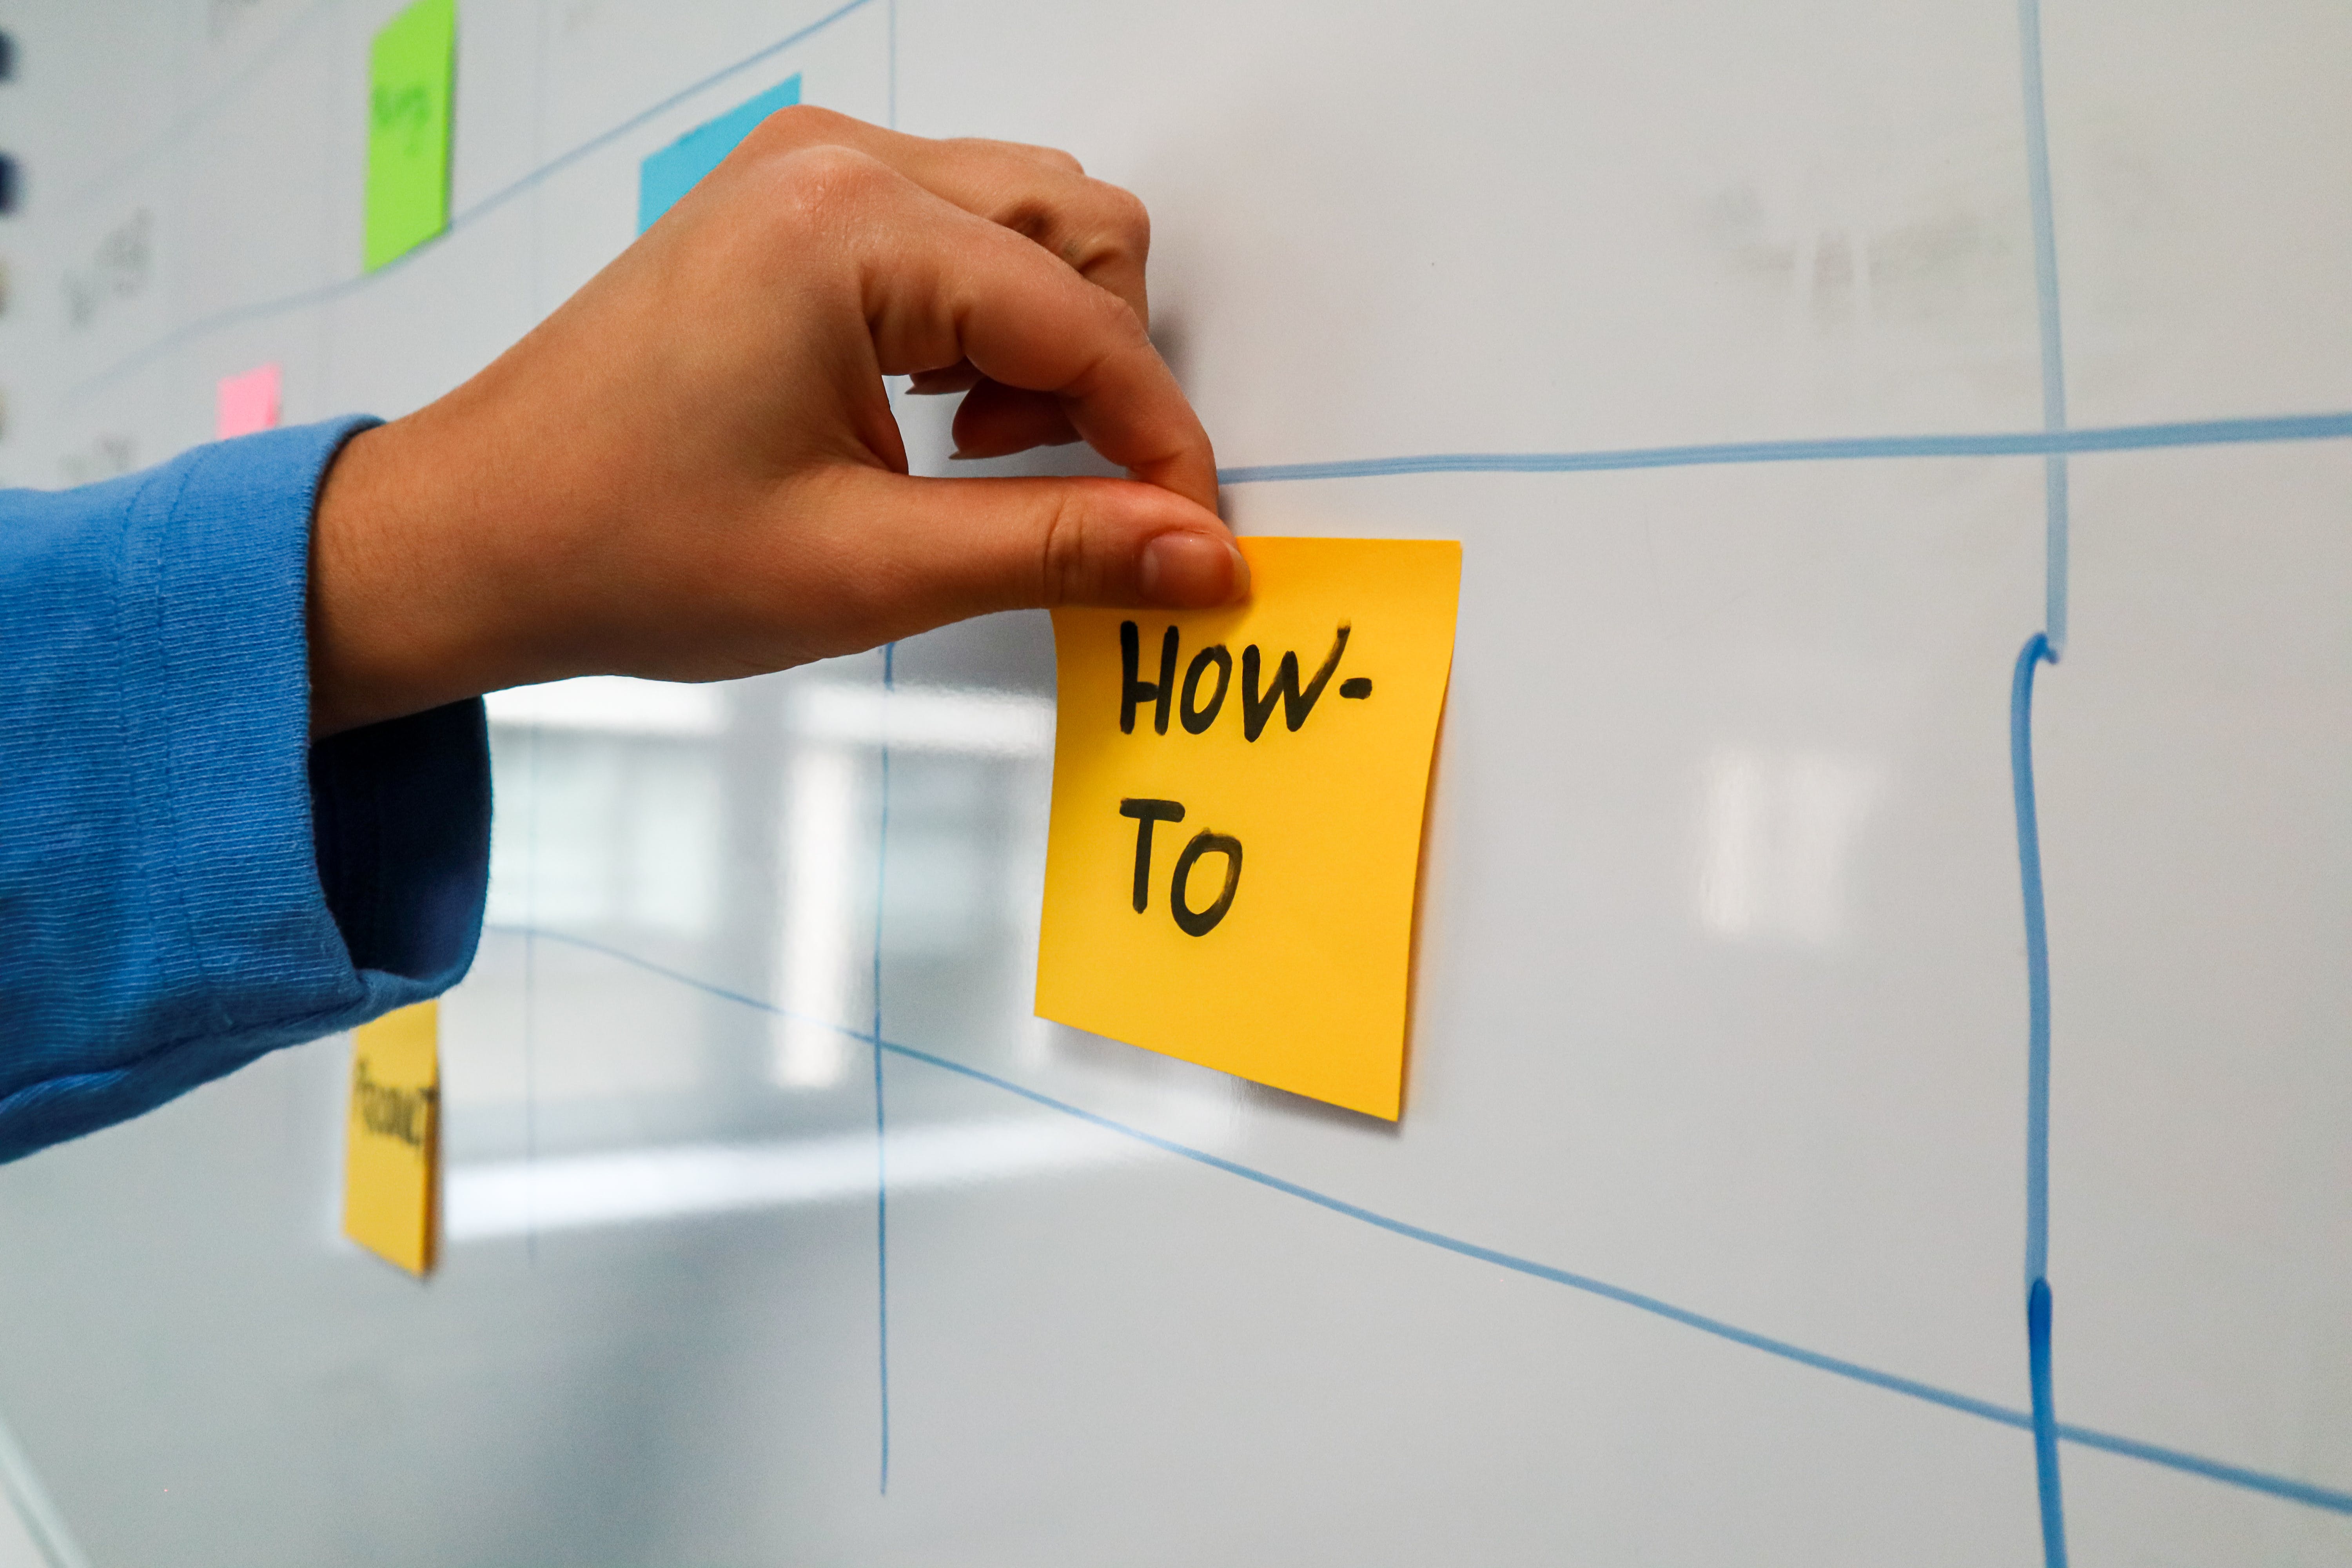 Hand posting a sticky note to a wall stating "How To"